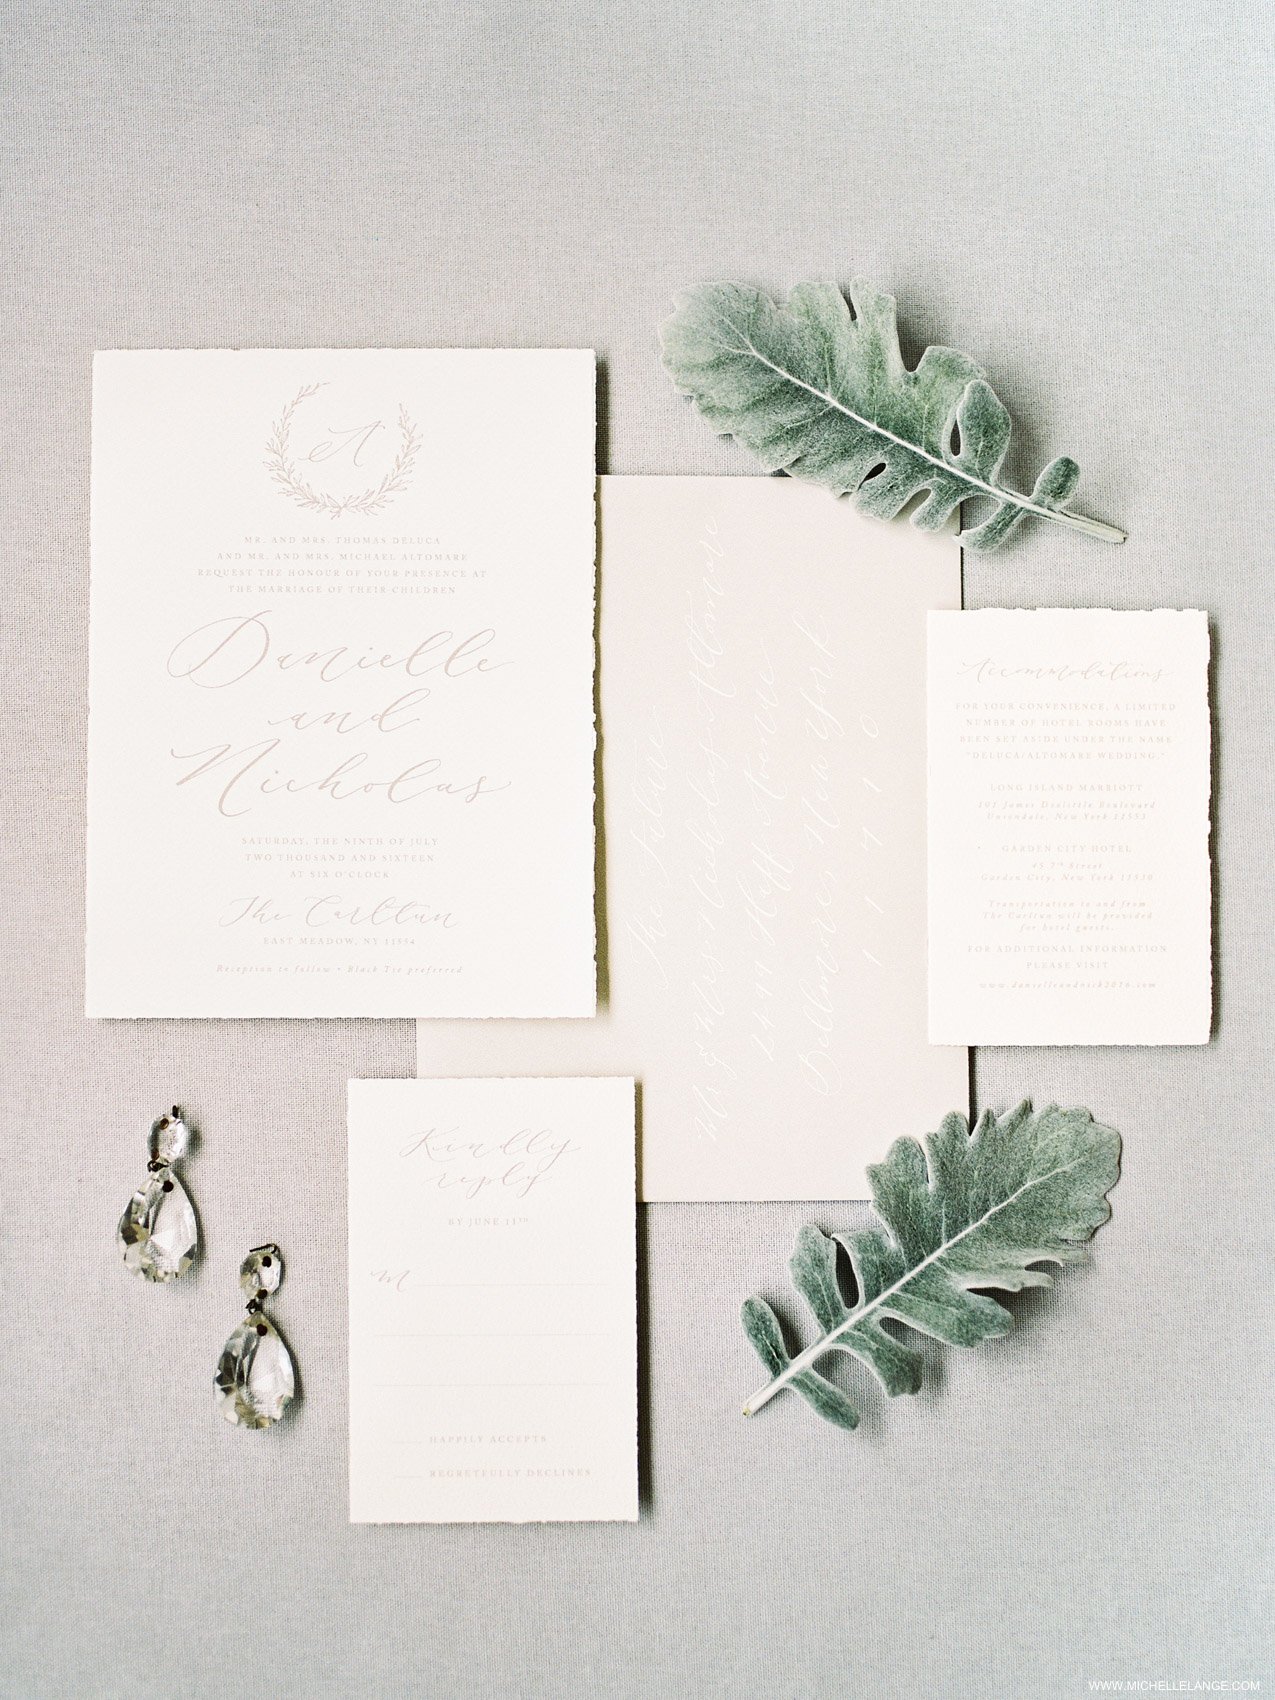 NY Wedding Photographer with Linen and Leaf Wedding Invitations